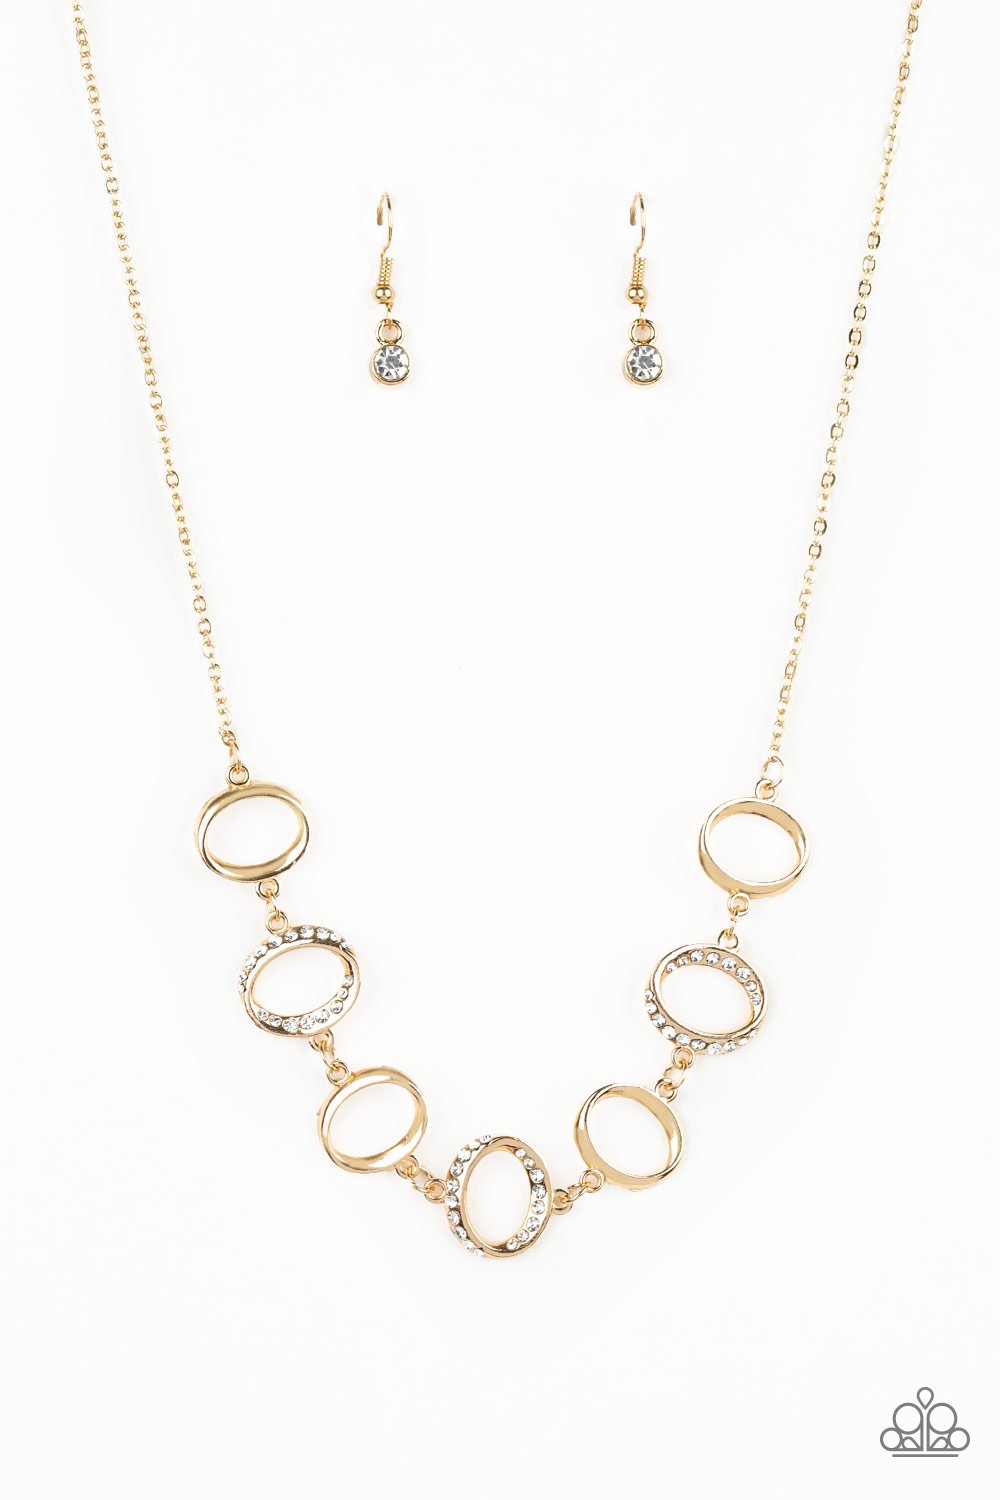 Inner Beauty - Gold Necklace